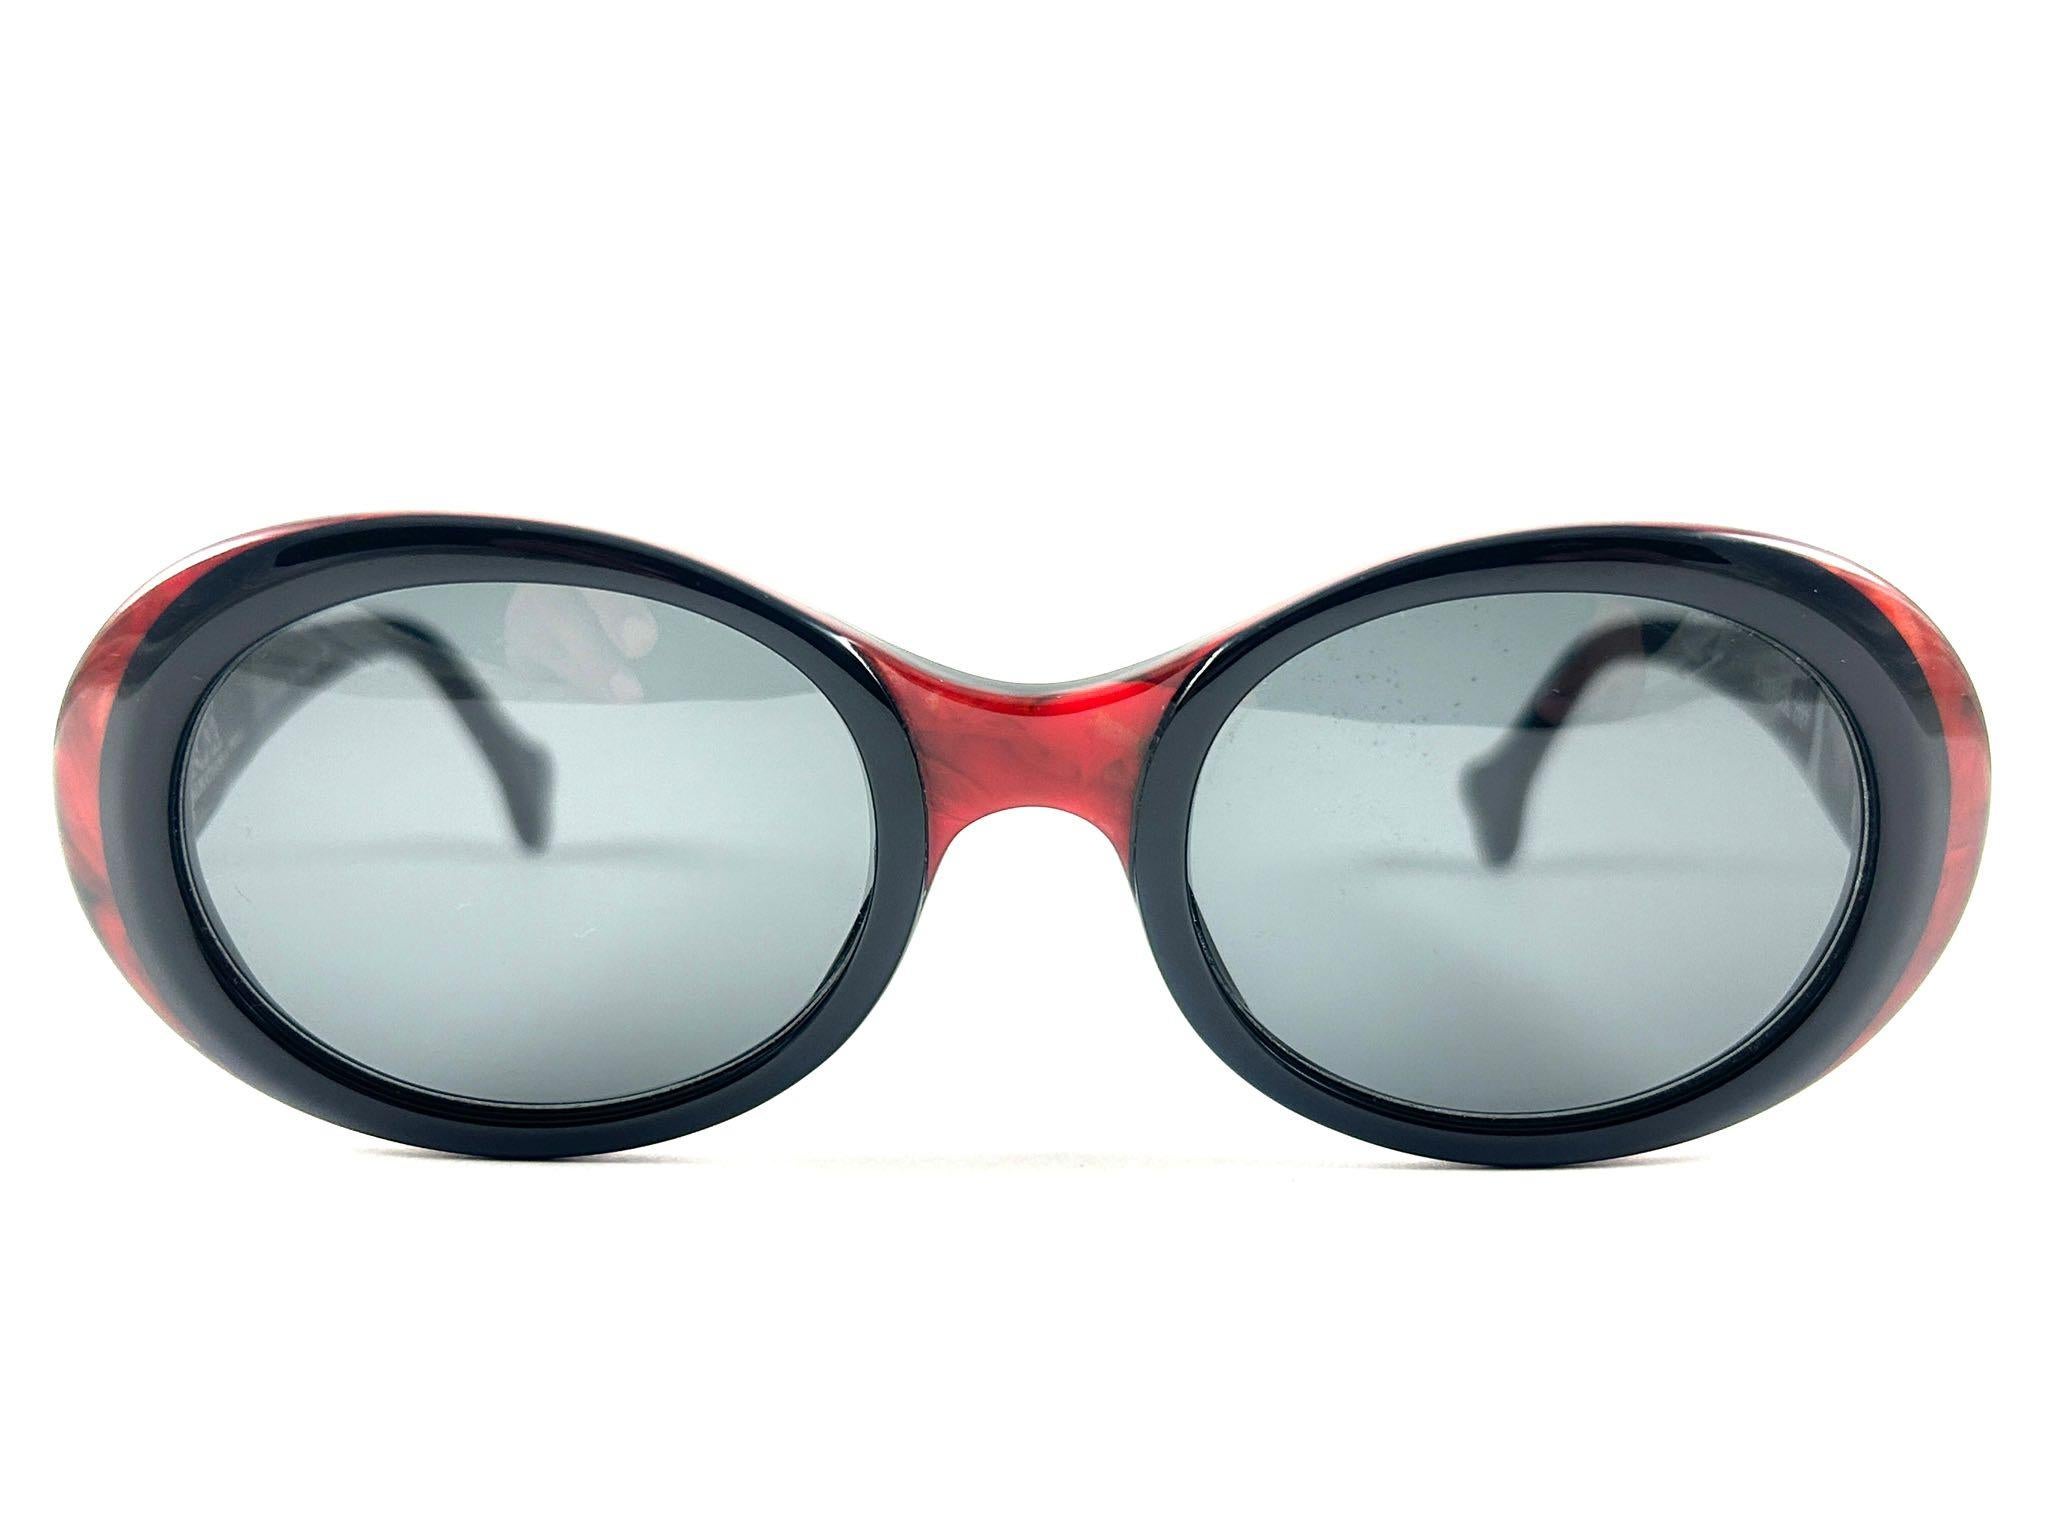 New Vintage Alain Mikli in black and red with bone shaped temples.

Rare item in new and unworn condition. Spotless smoke grey lenses.

Please consider that this item is nearly 40 years old so it could show minor sign of wear due to storage.

Made